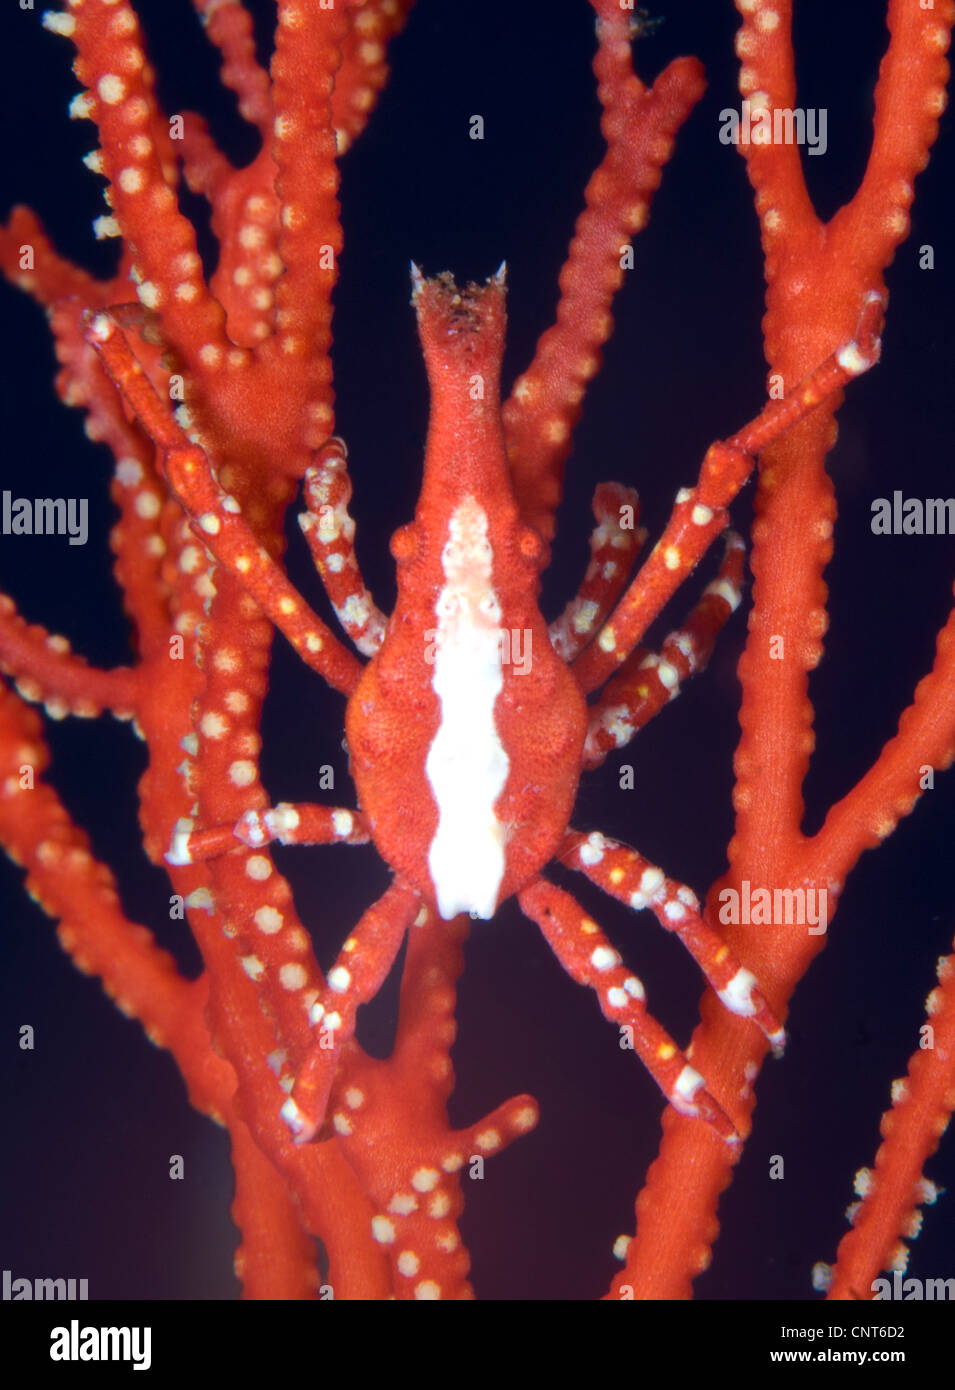 Bright red crab (Xenocarcinus conicus) on fan coral, Kimbe Bay, Papua New Guinea. Stock Photo